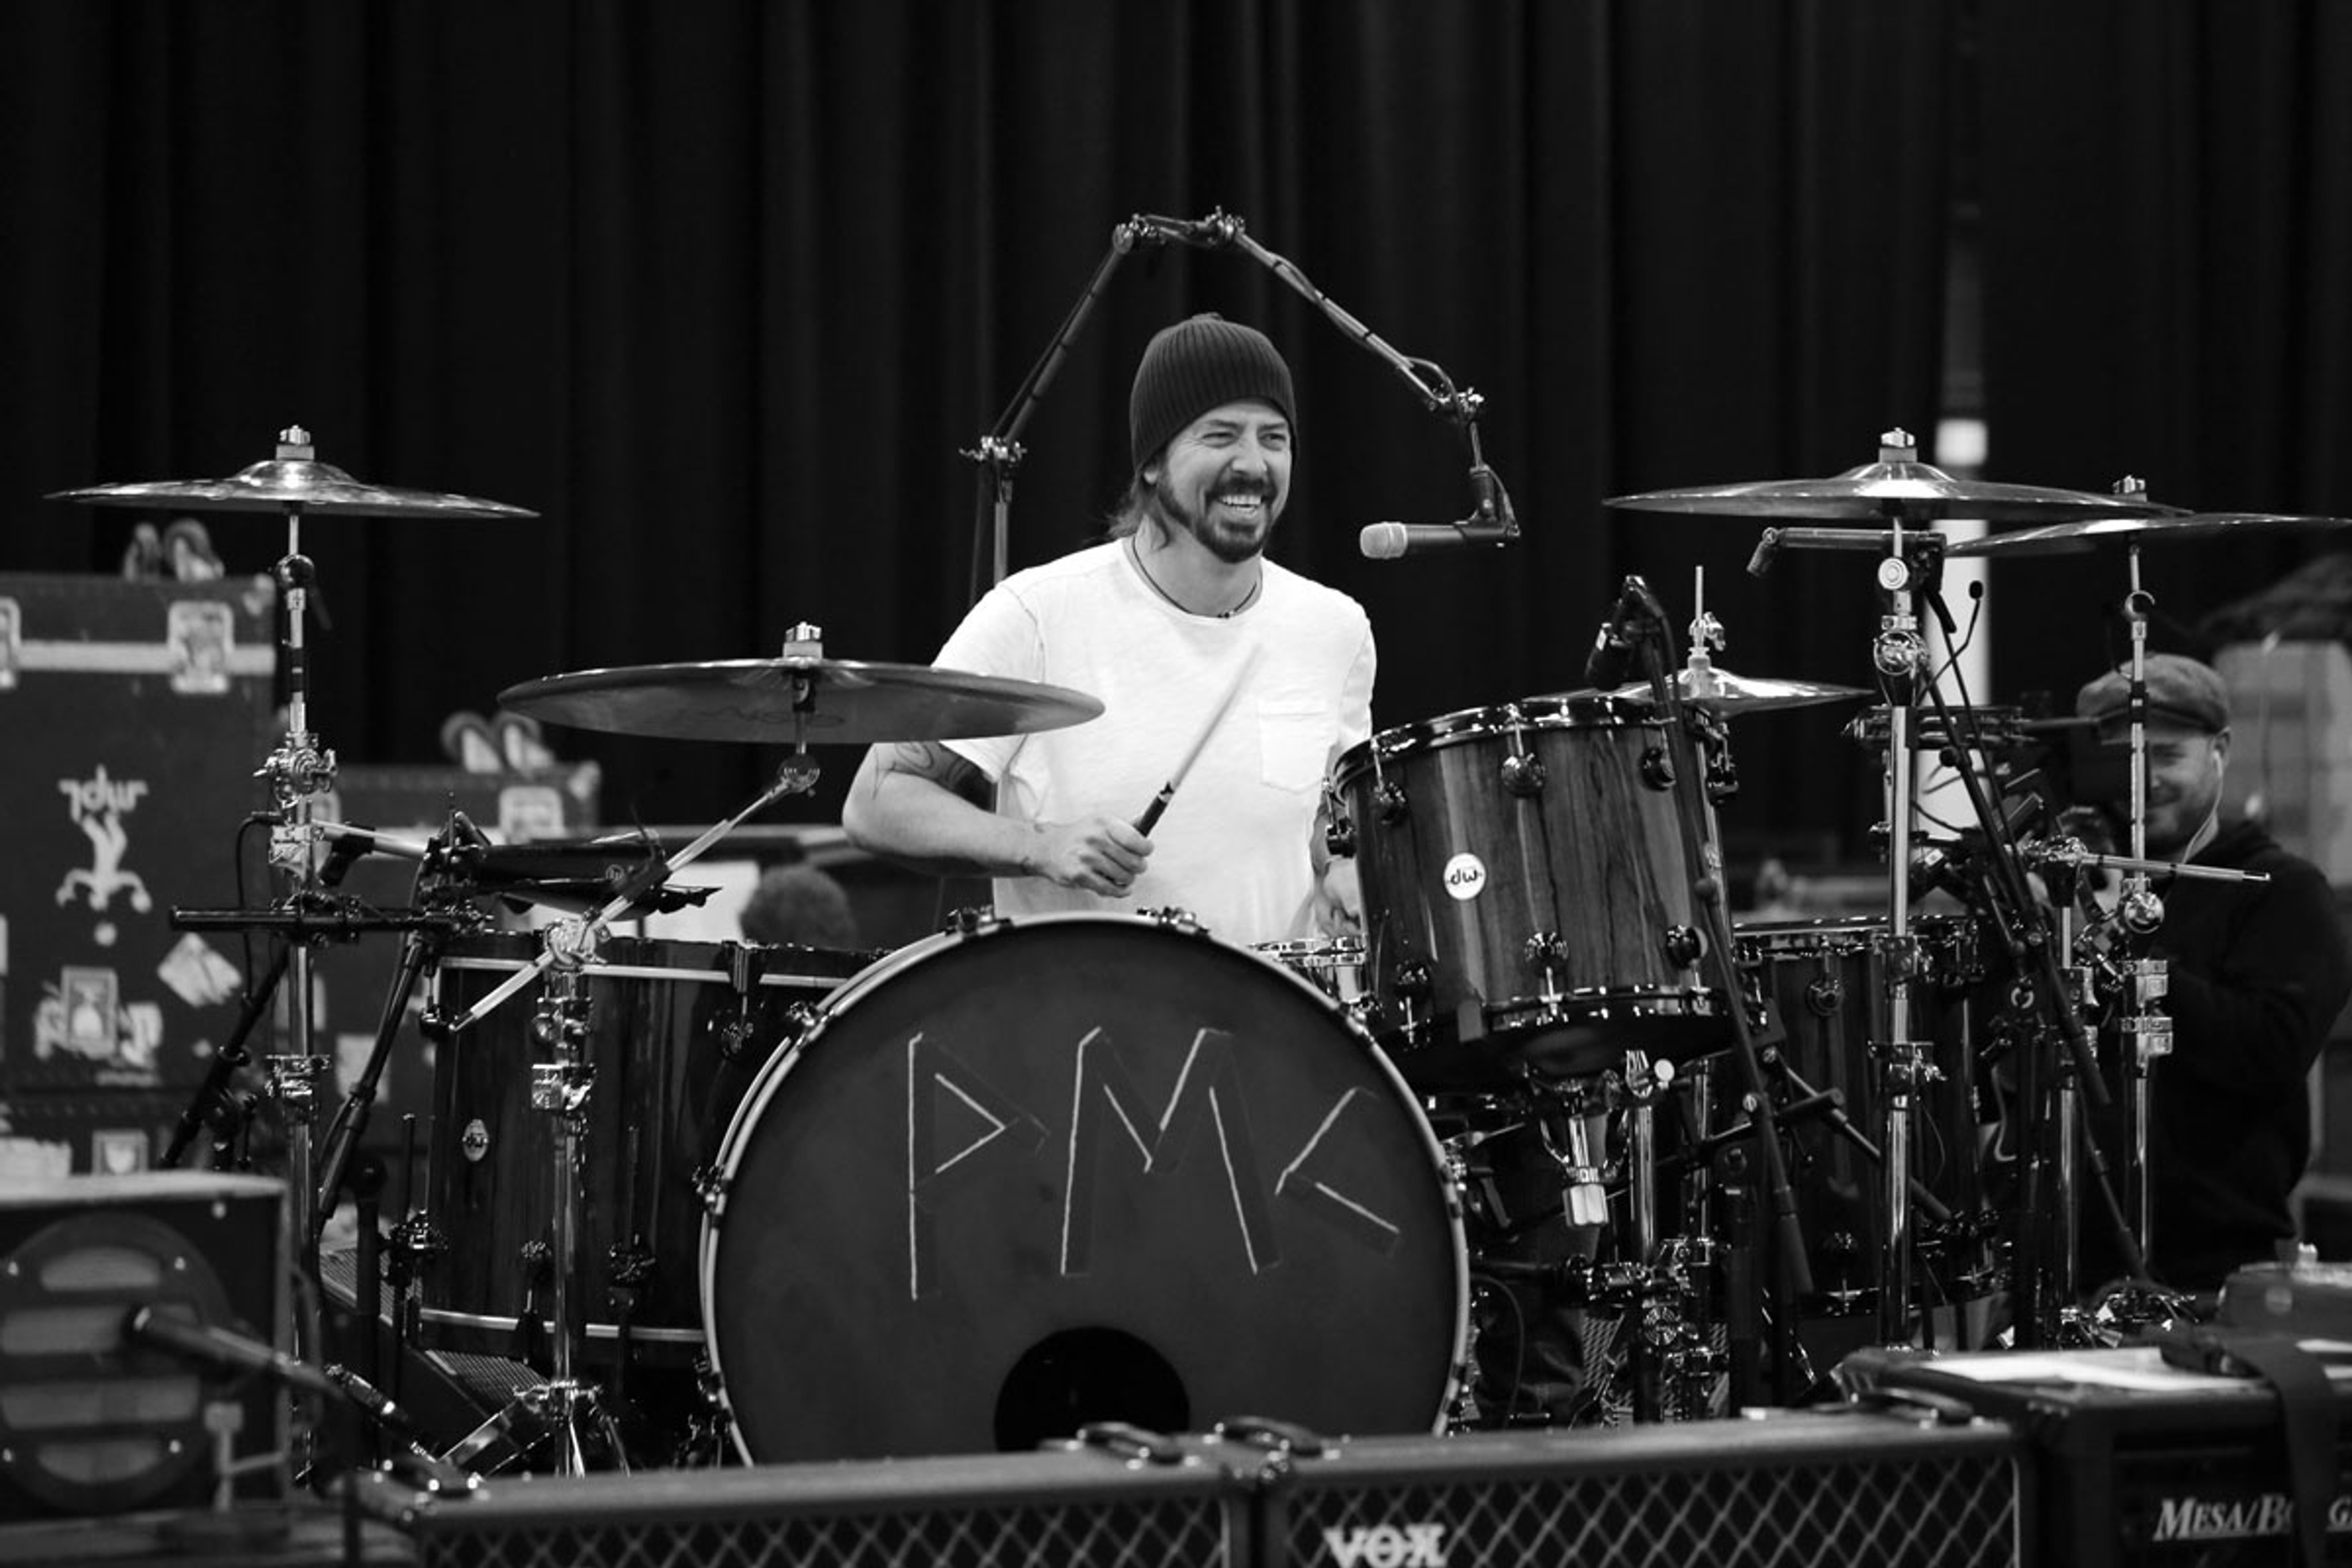 Dave Grohl at rehearsals, 12-12-12 Hurricane Sandy Benefit, Madison Square Garden, NYC, 10th December 2012